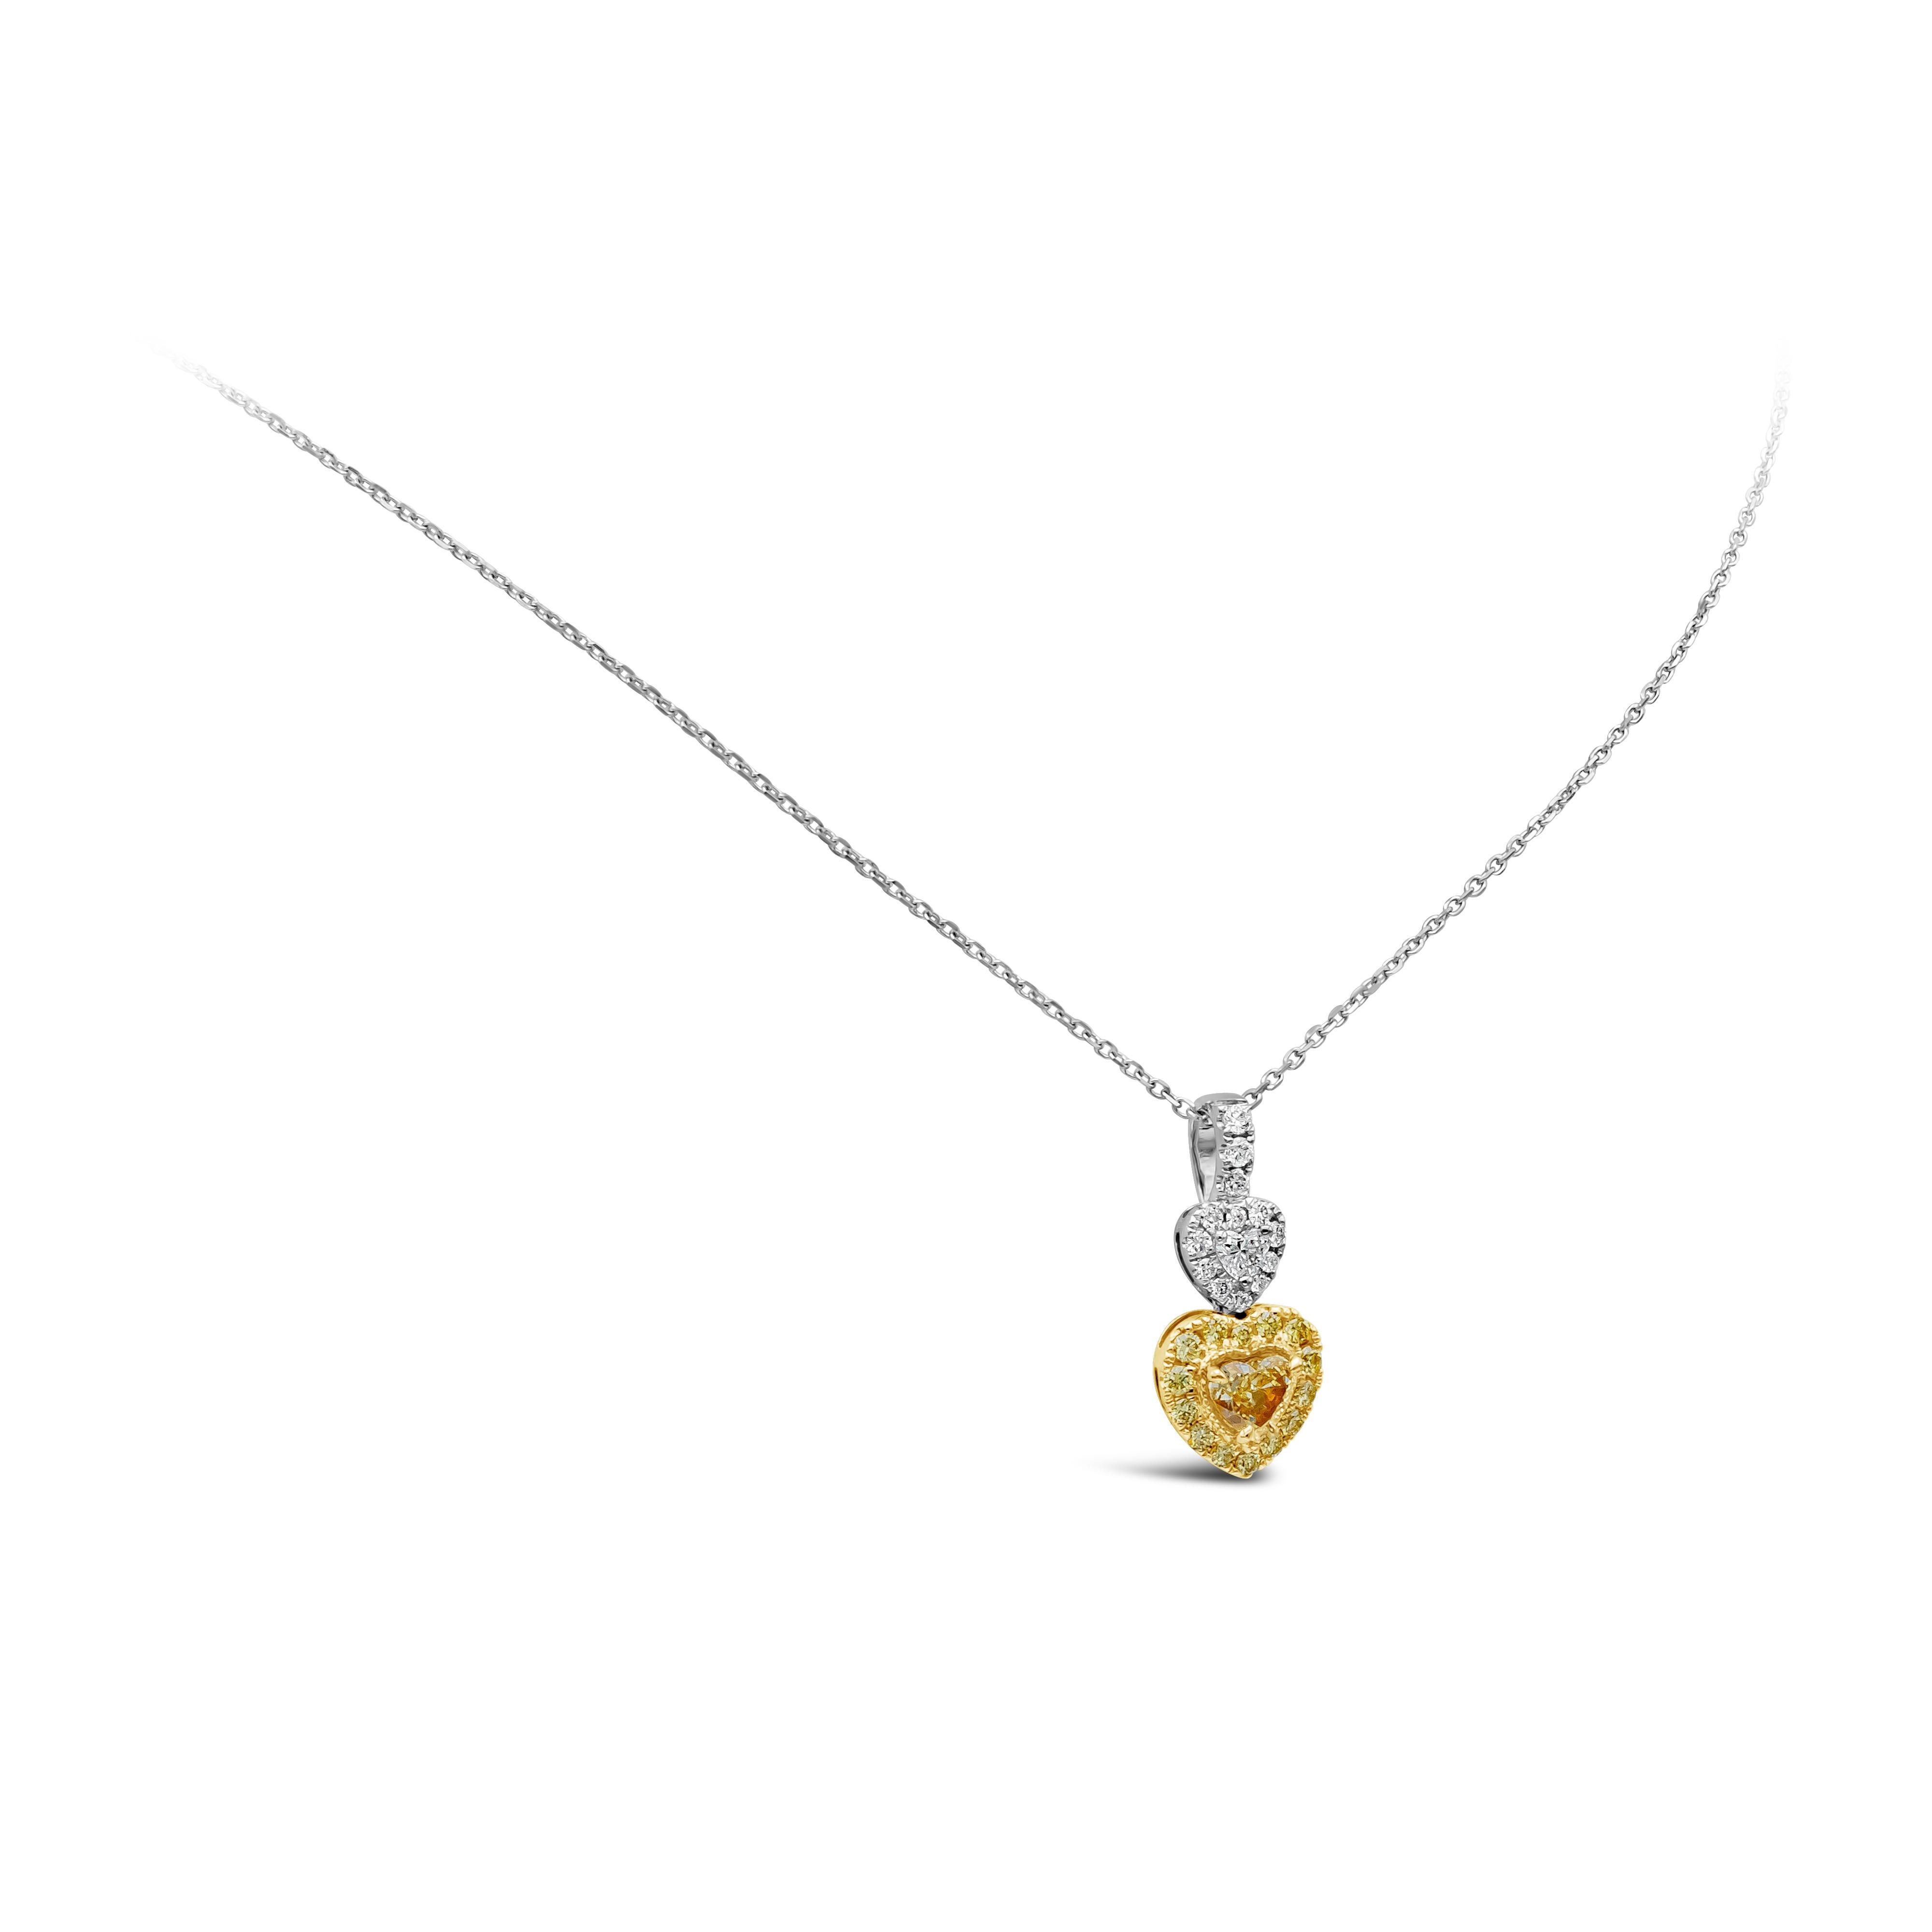 This beautiful pendant necklace that has a 0.32 carat heart shape fancy yellow diamond with VS clarity and is surrounded by 14 yellow brilliant round diamonds that weighs at 0.17 carat total with VS/SI clarity. On top is 0.08 carat heart shape white